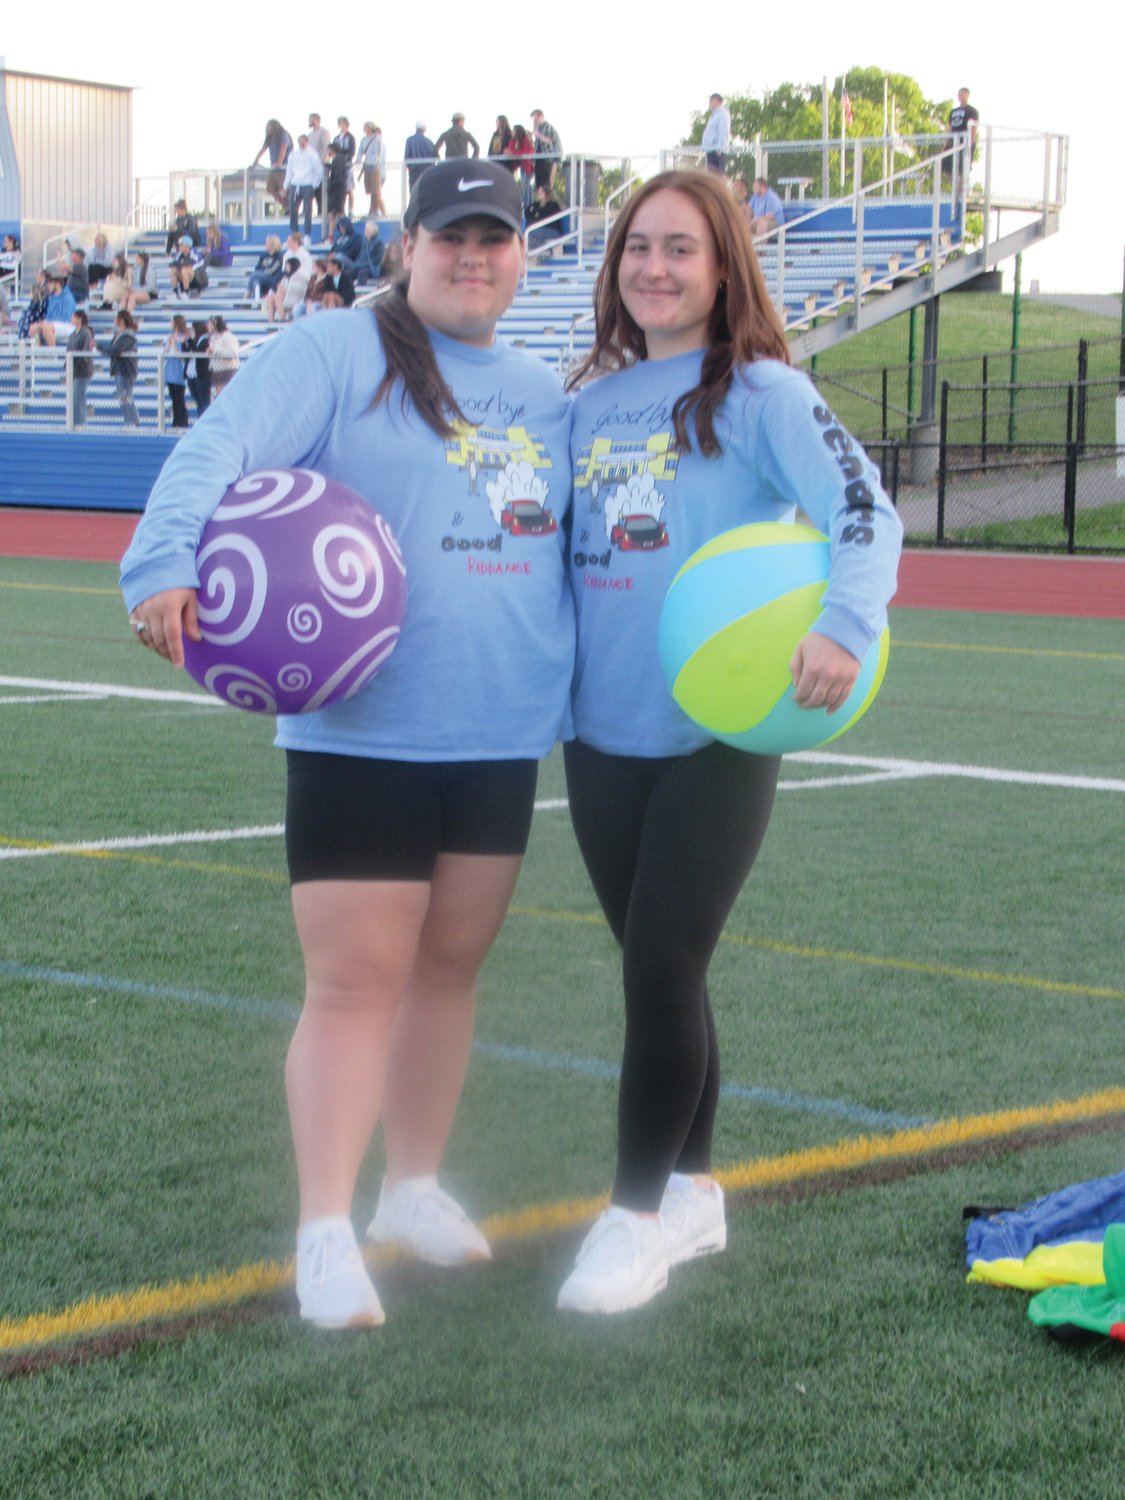 TERRIFIC TWINS: JHS Student Council President Rebecca Clements (left) and her twin sister Janet, who is secretary of the group, enjoy lighter moment during last week’s Battle of the Classes Teachers vs. Students.